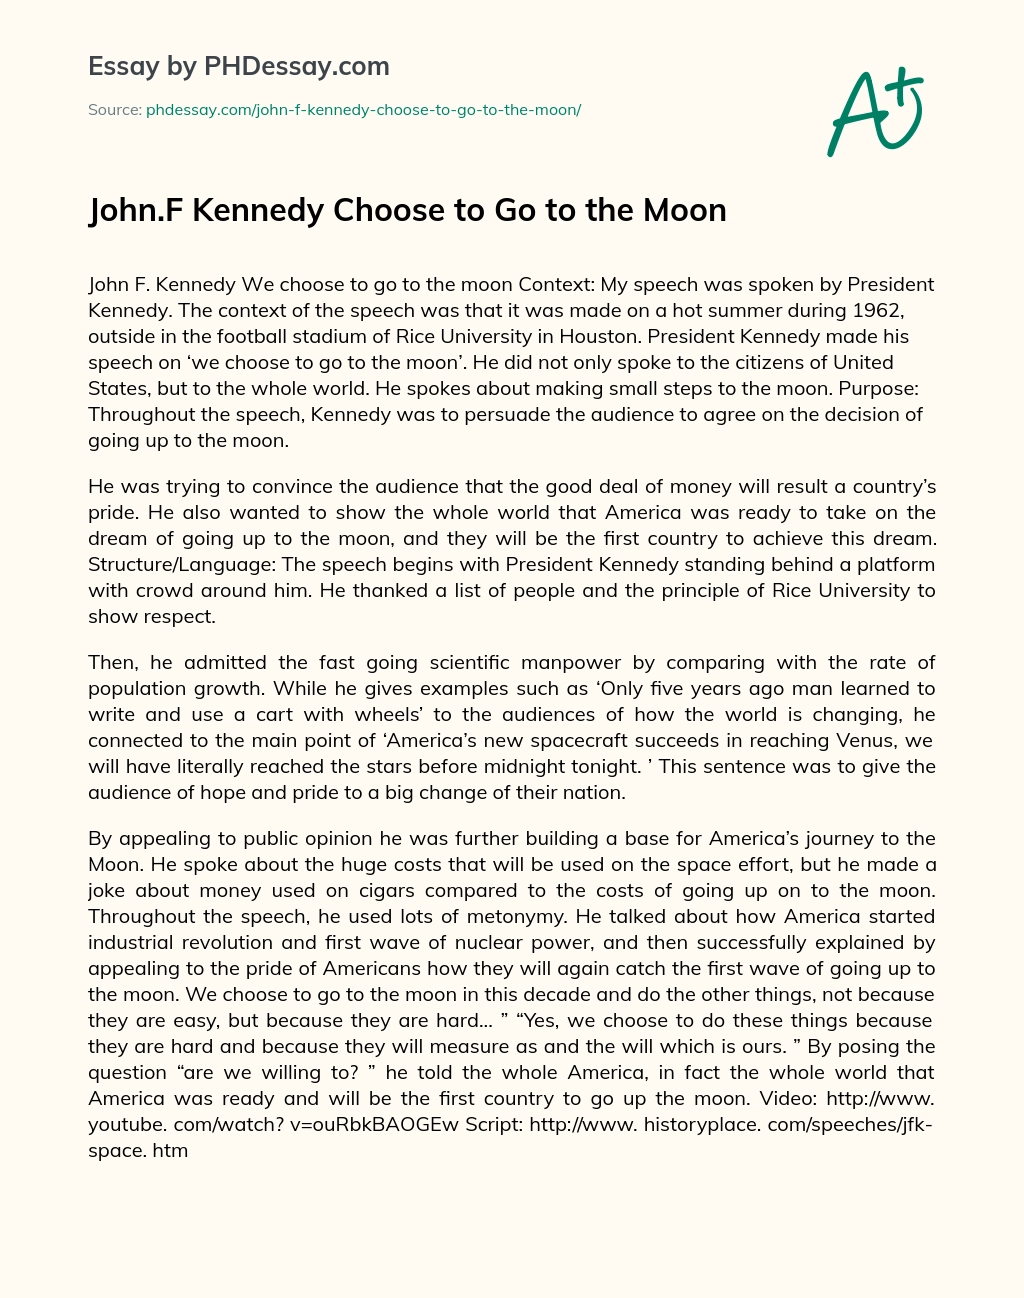 John.F Kennedy Choose to Go to the Moon essay